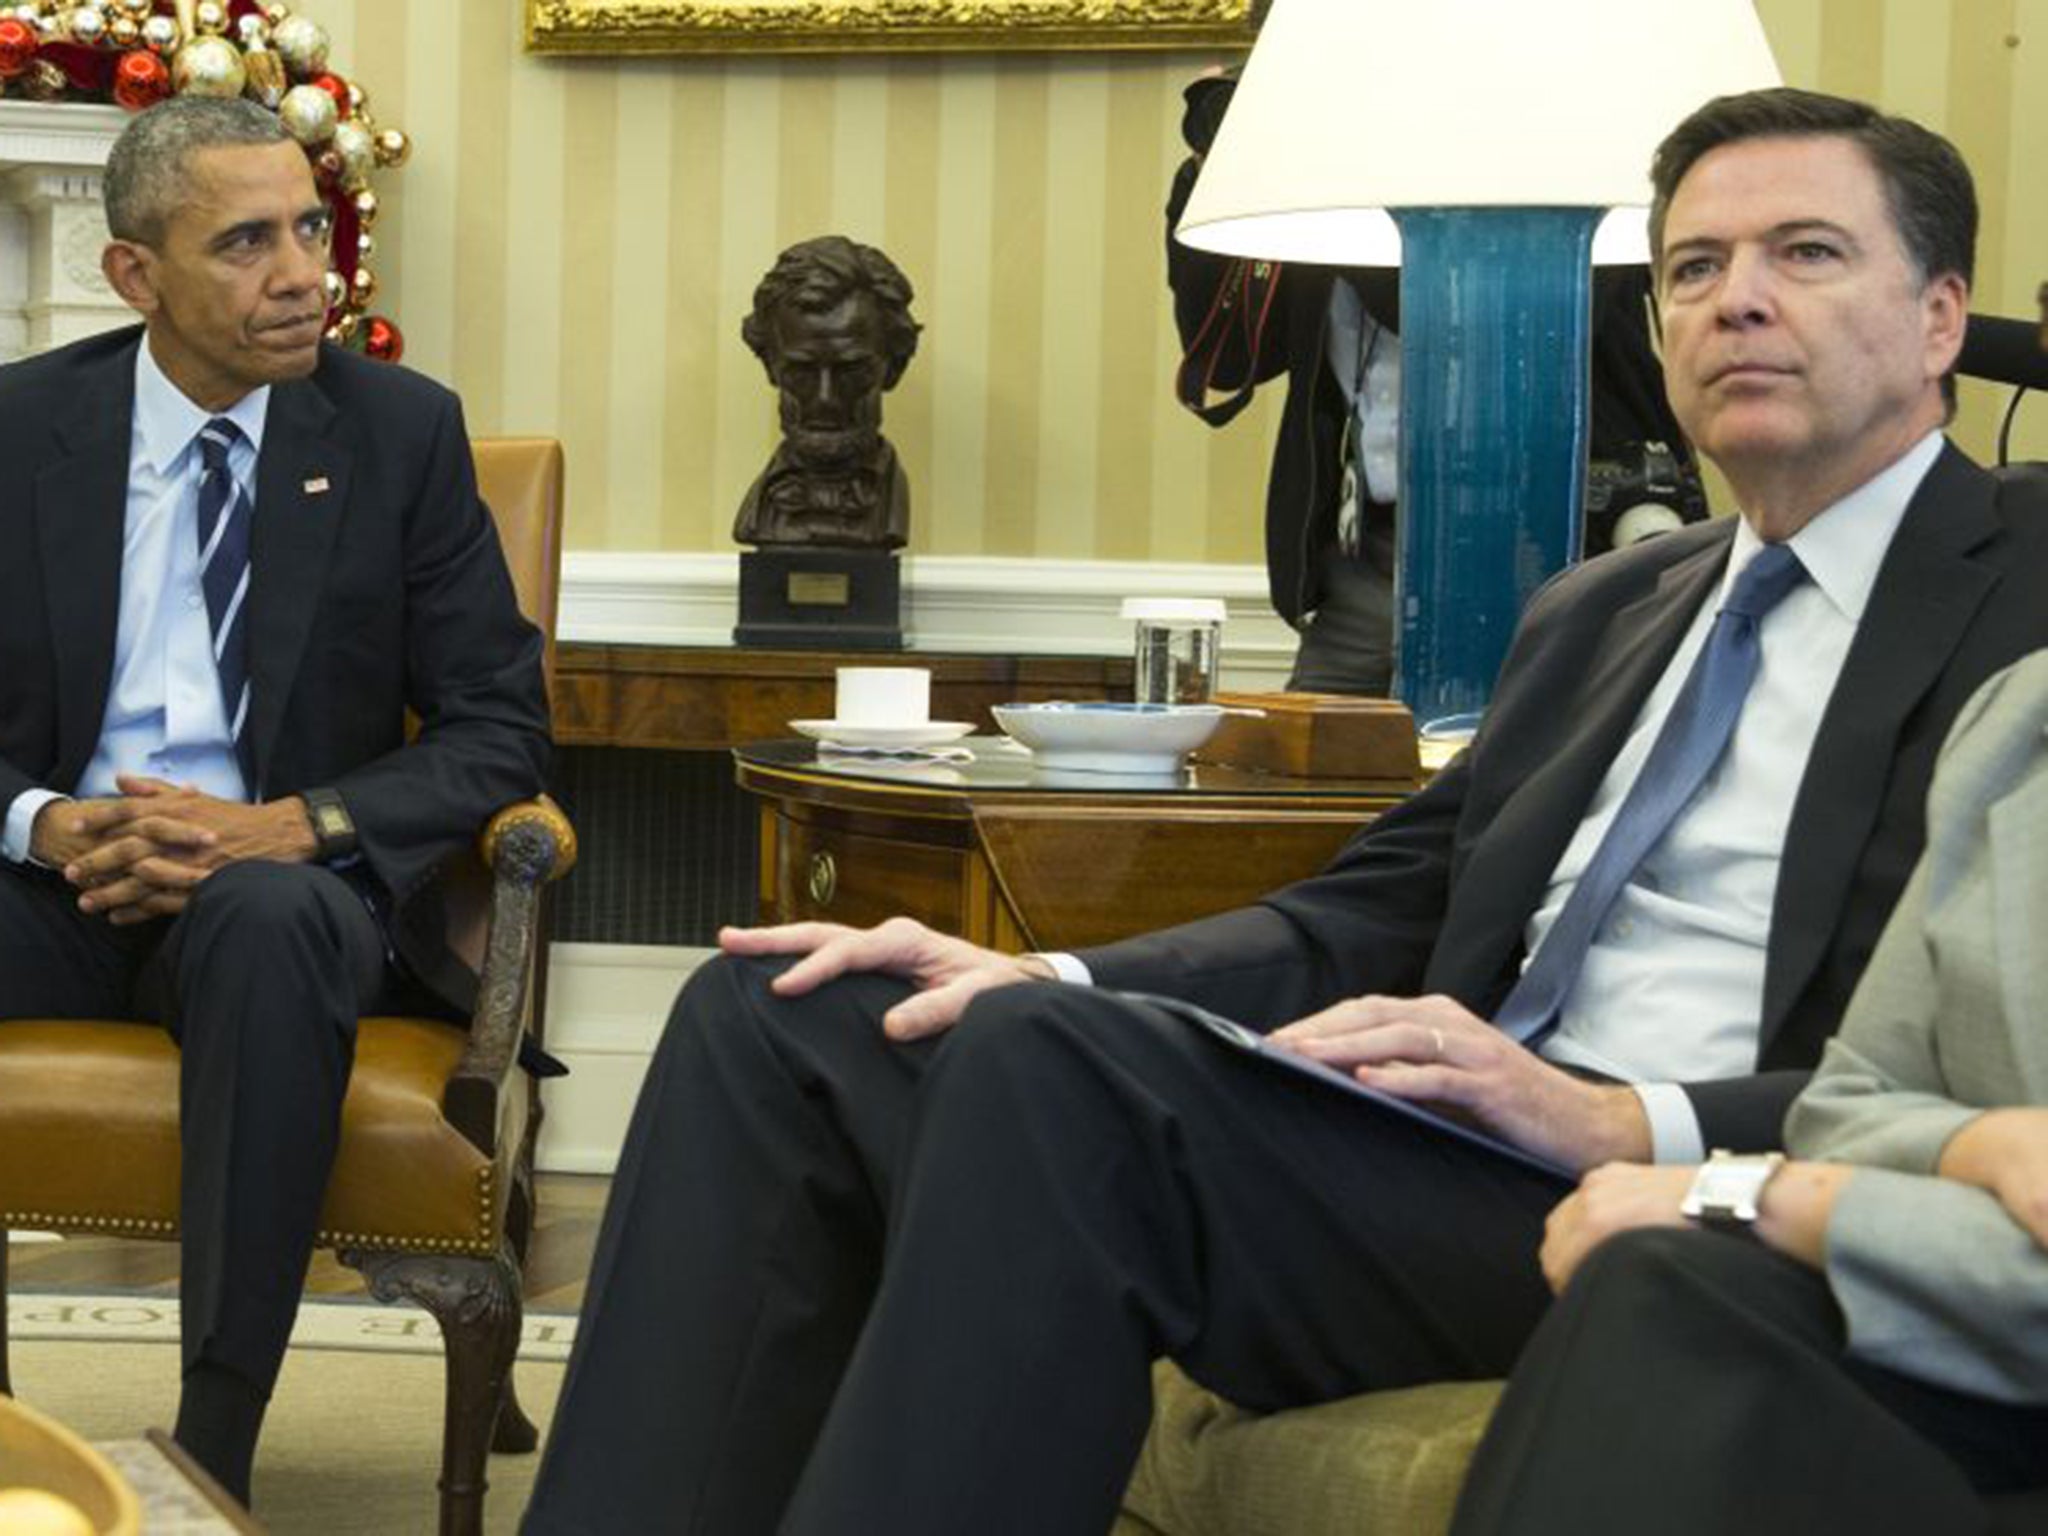 President Obama with James Comey